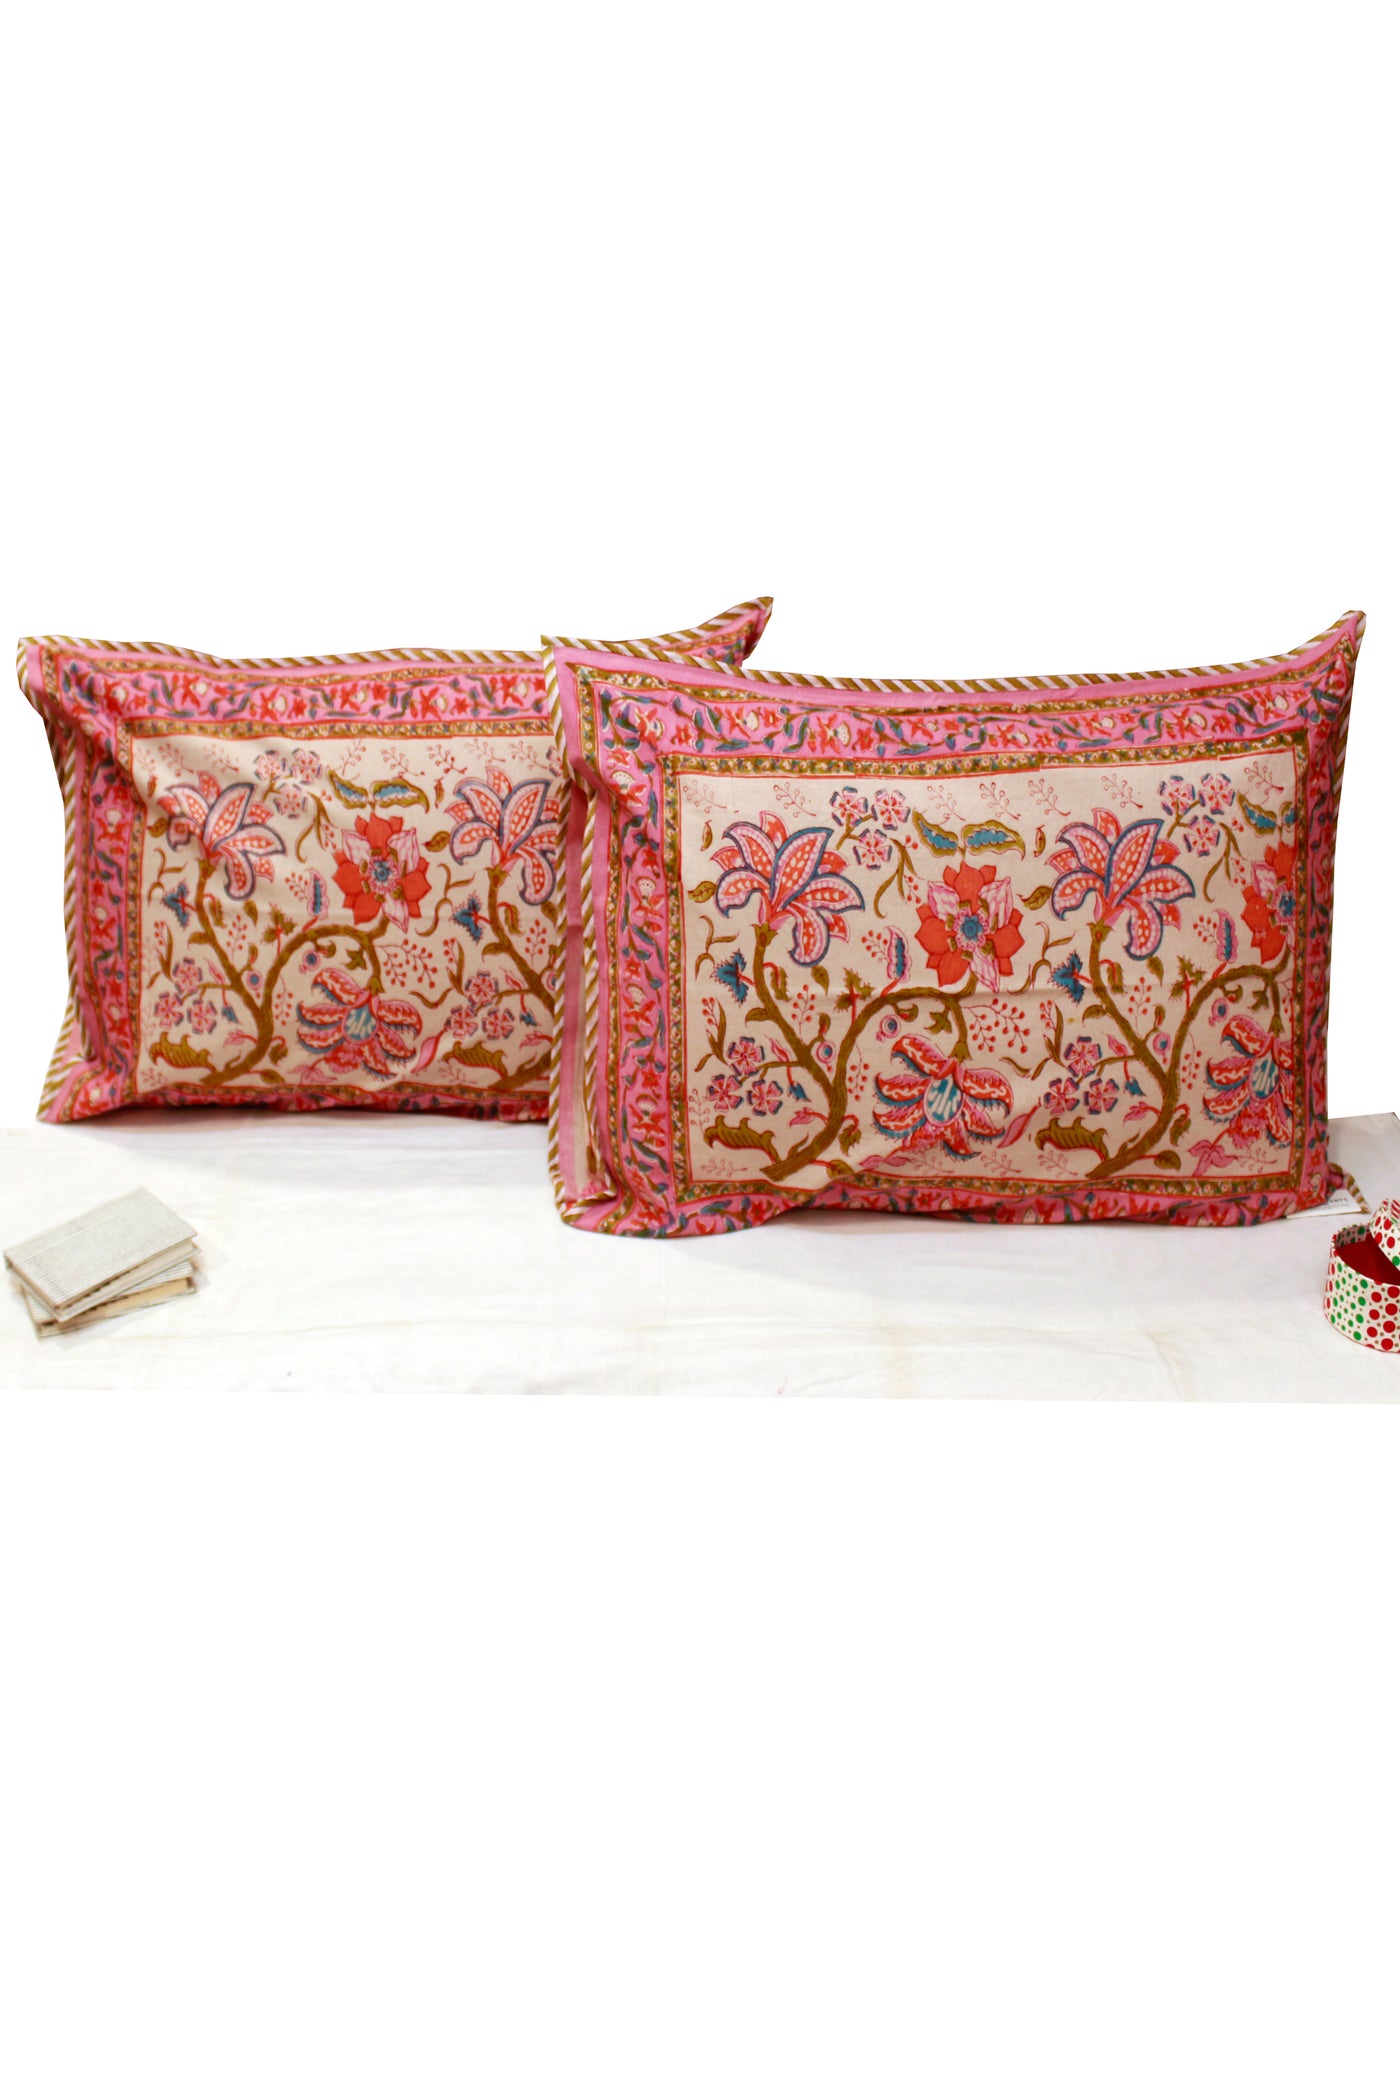 Cotton Flower Jaal Hand Block Printed Pillow Cover in Blossom Pink